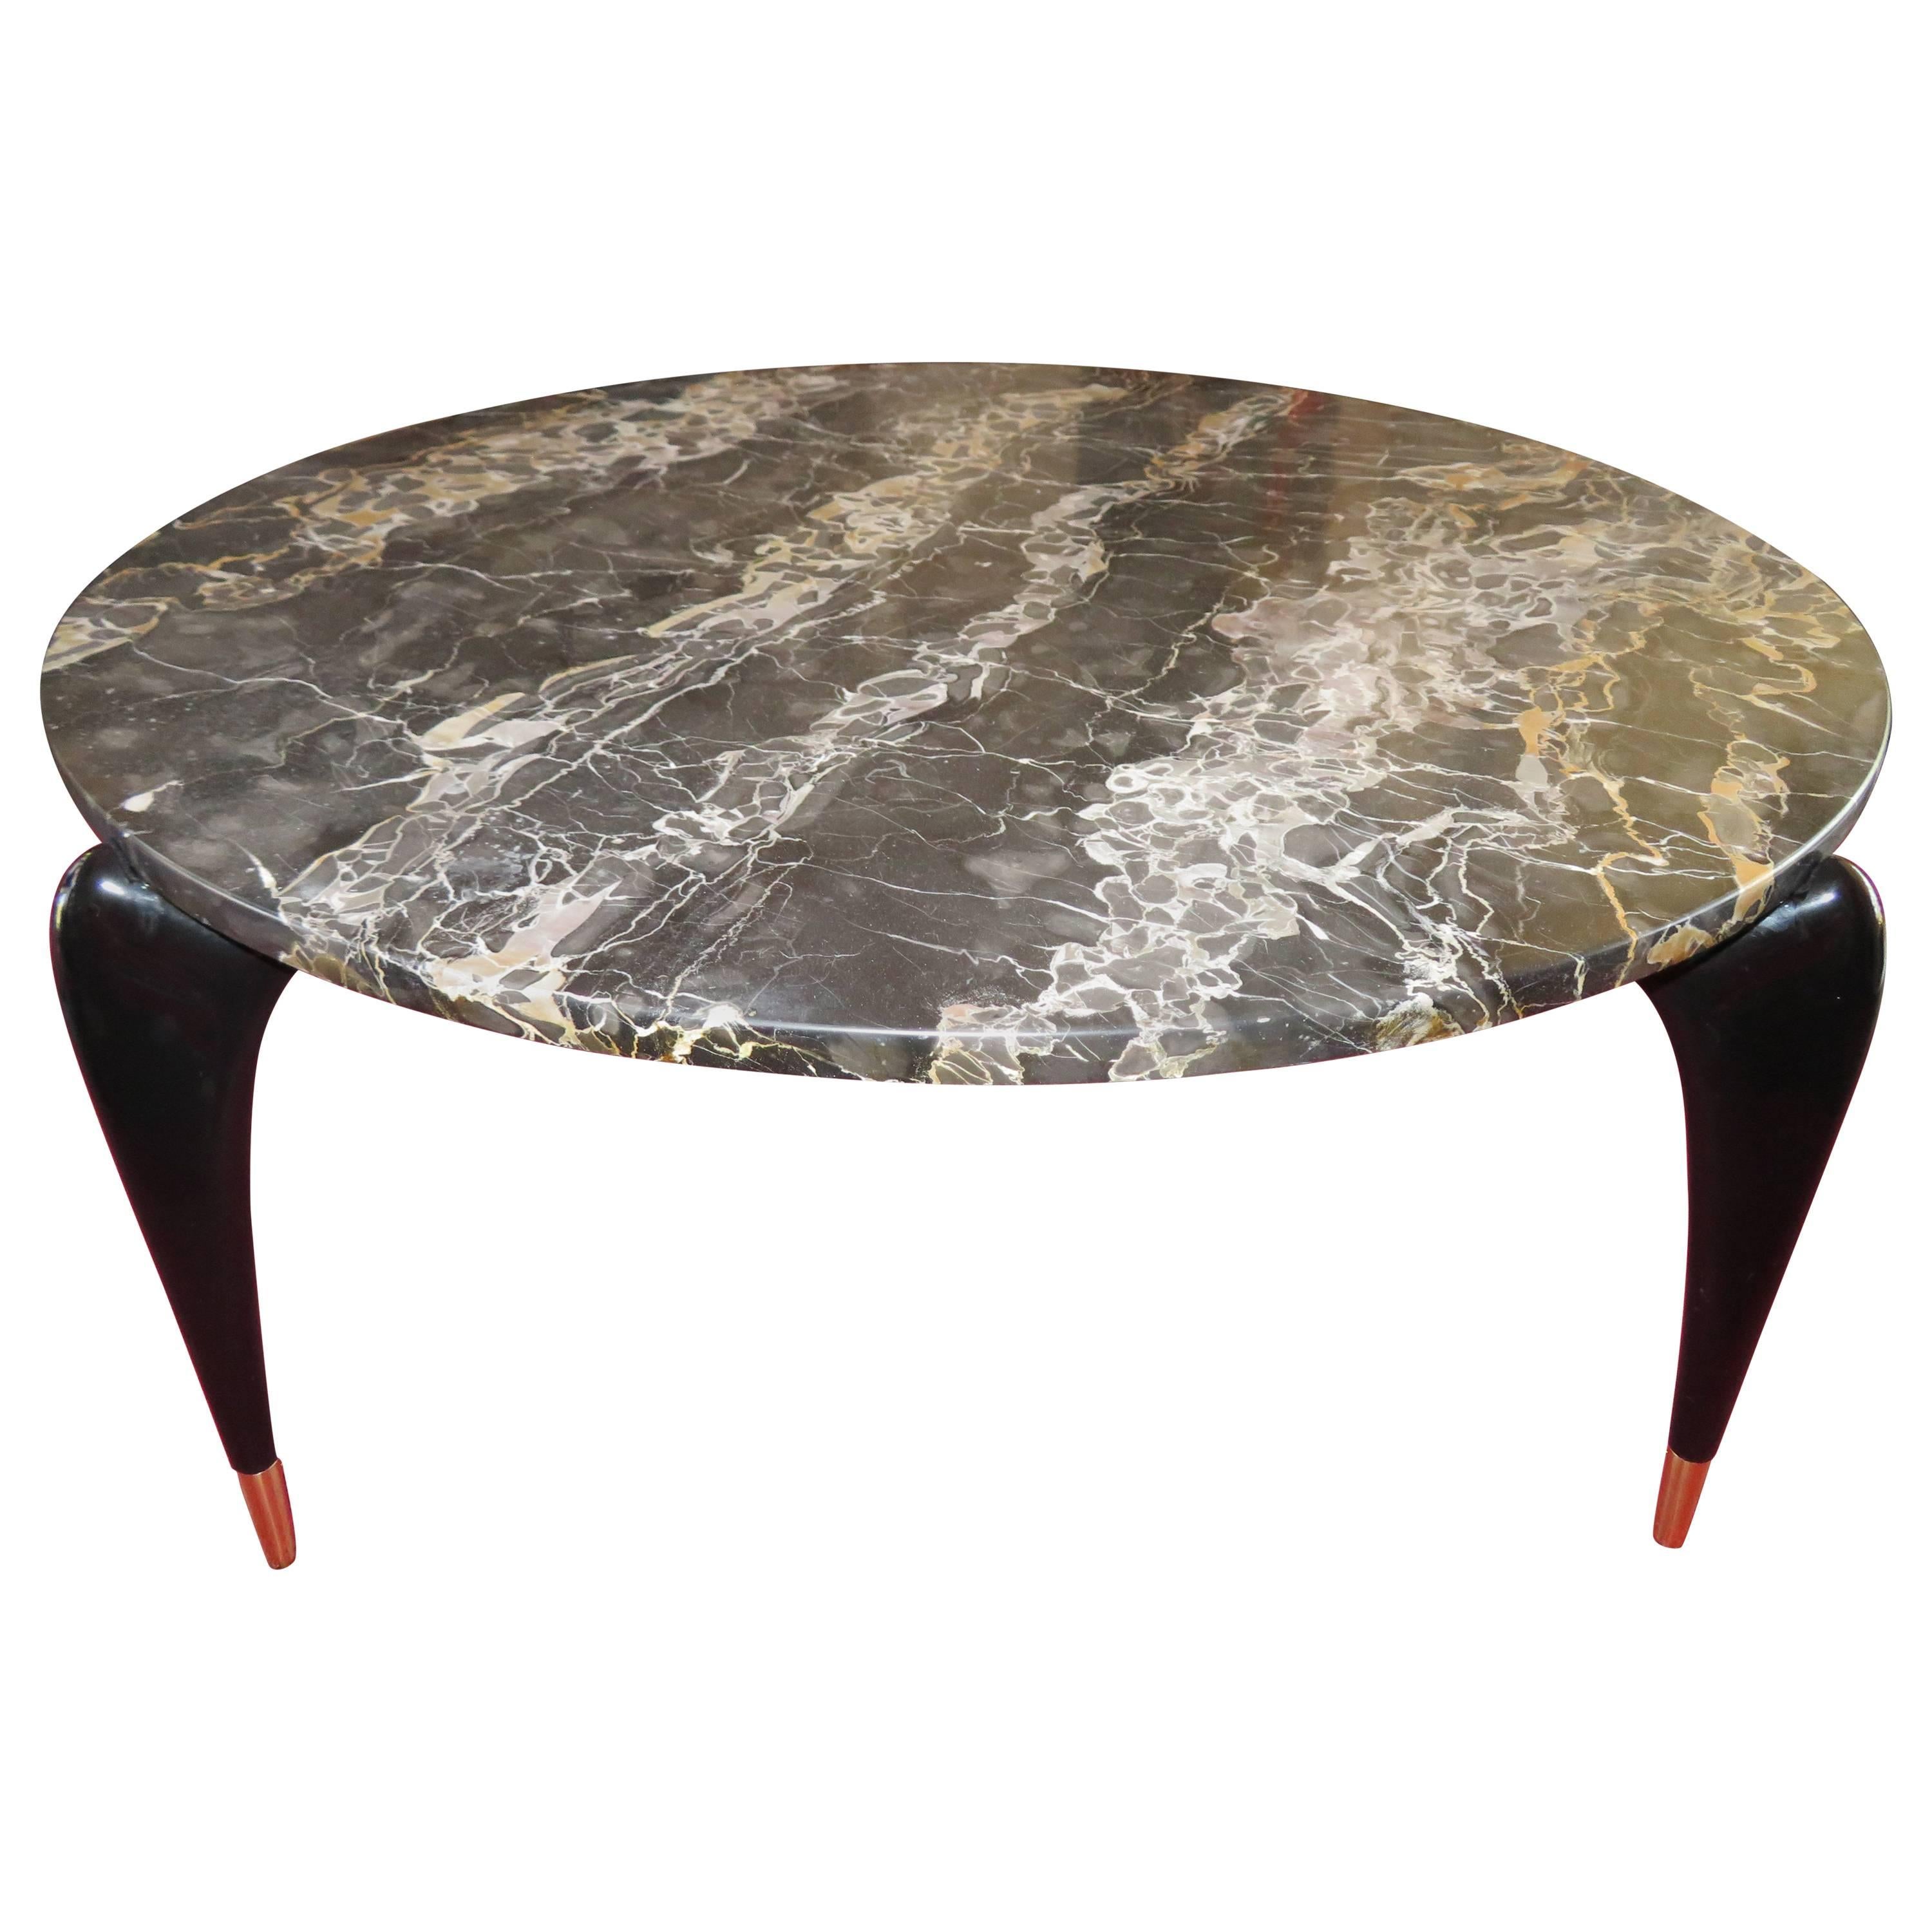 Gio Ponti Attributed Italian Mid-Century Modern Black Lacquered Marble Coffee